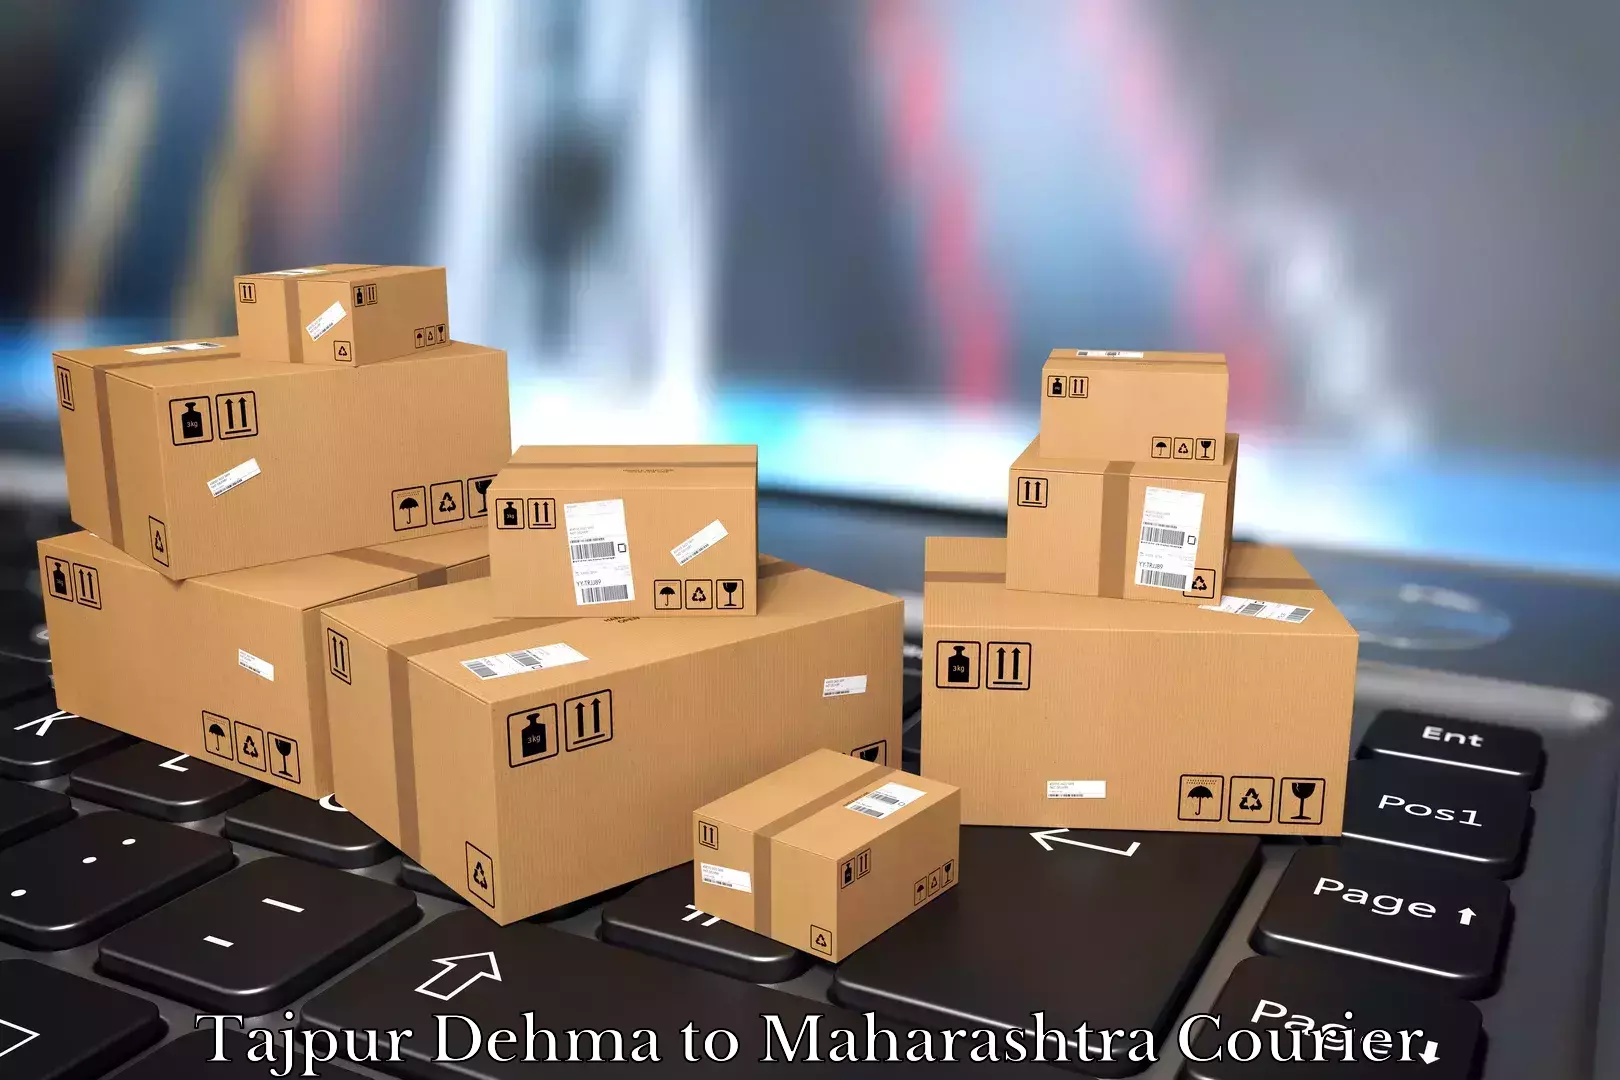 Moving and handling services Tajpur Dehma to Palghar